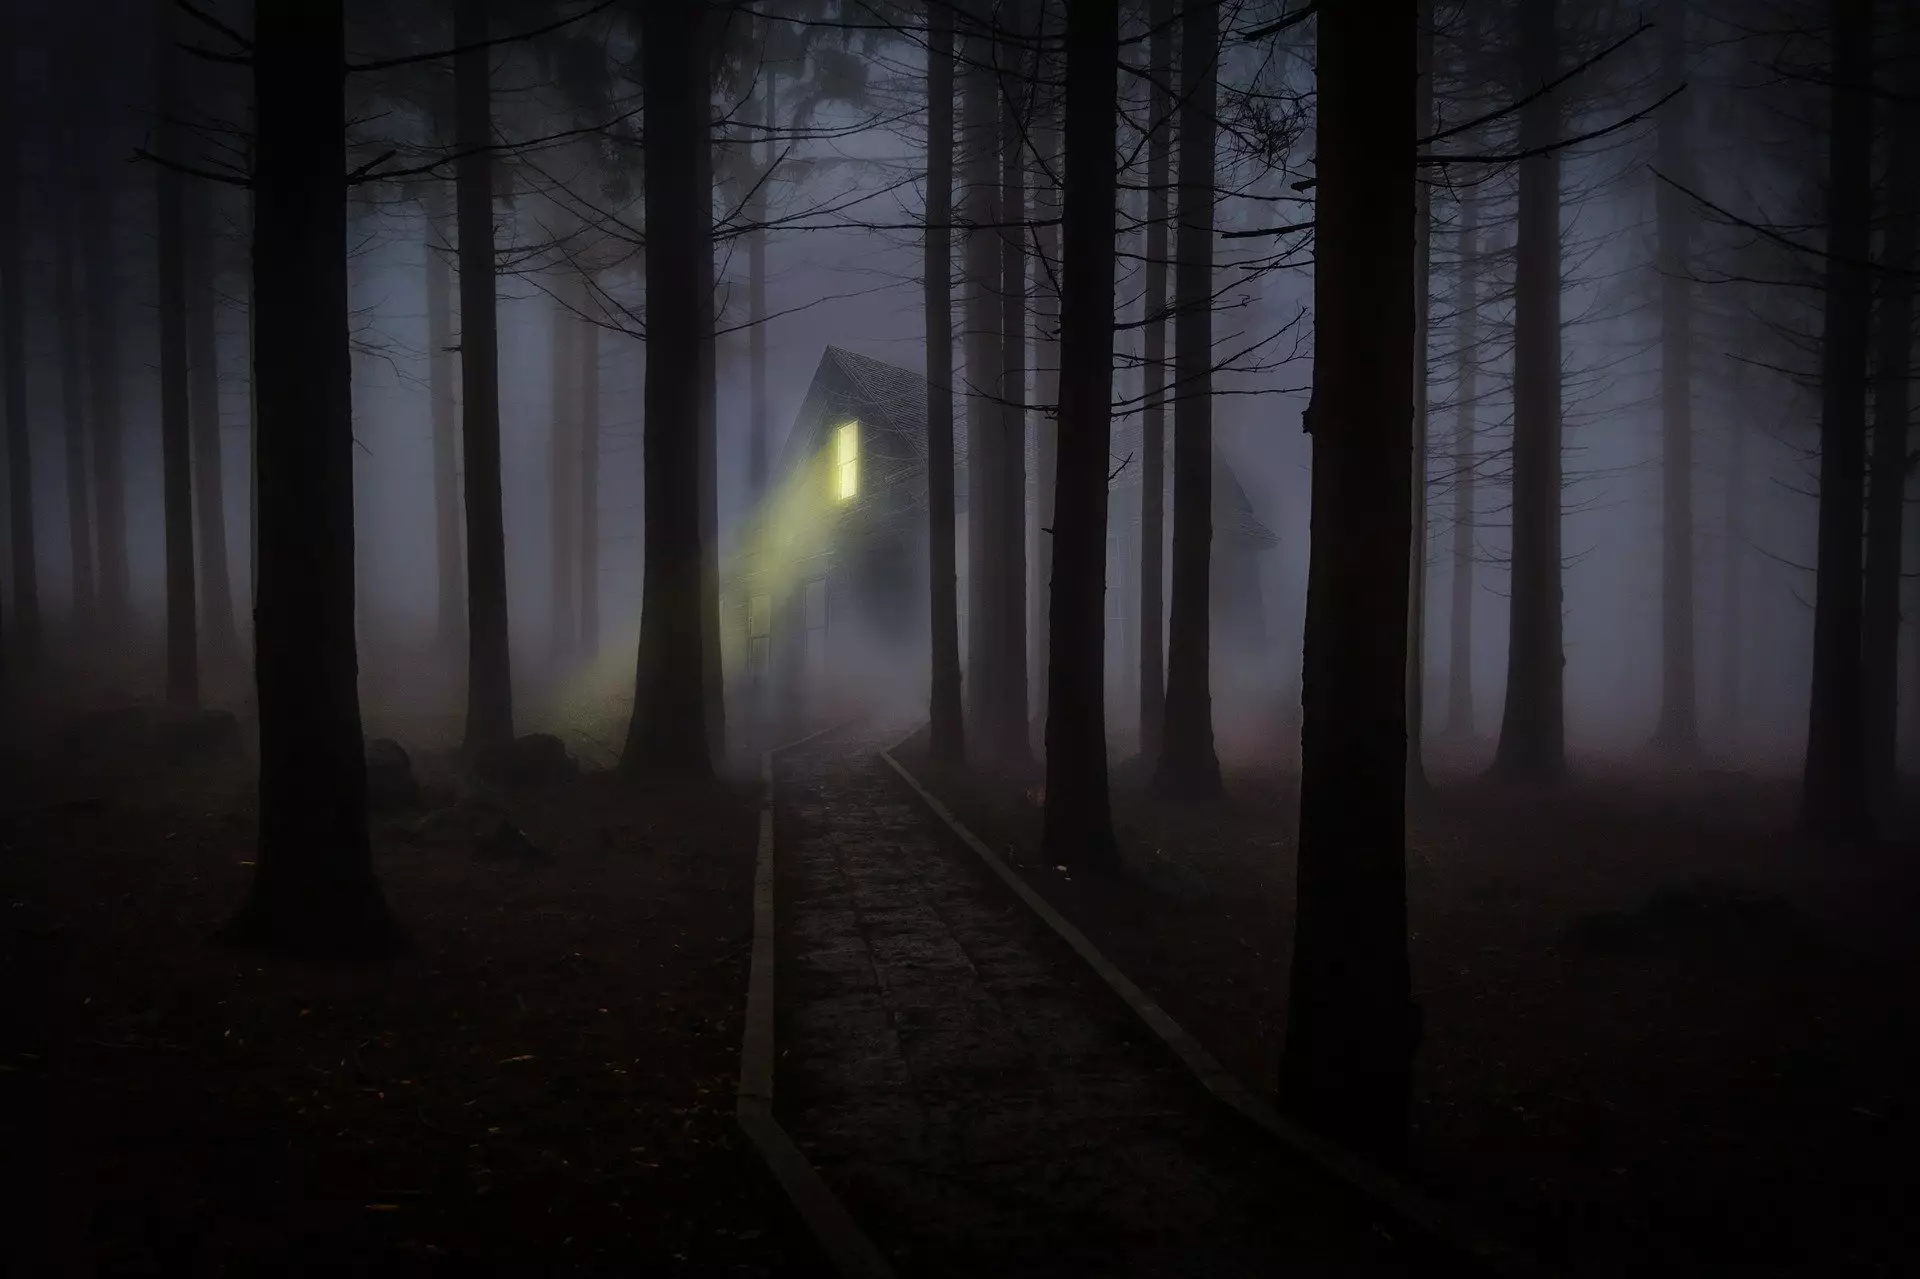 The series will look at haunted places in the US (